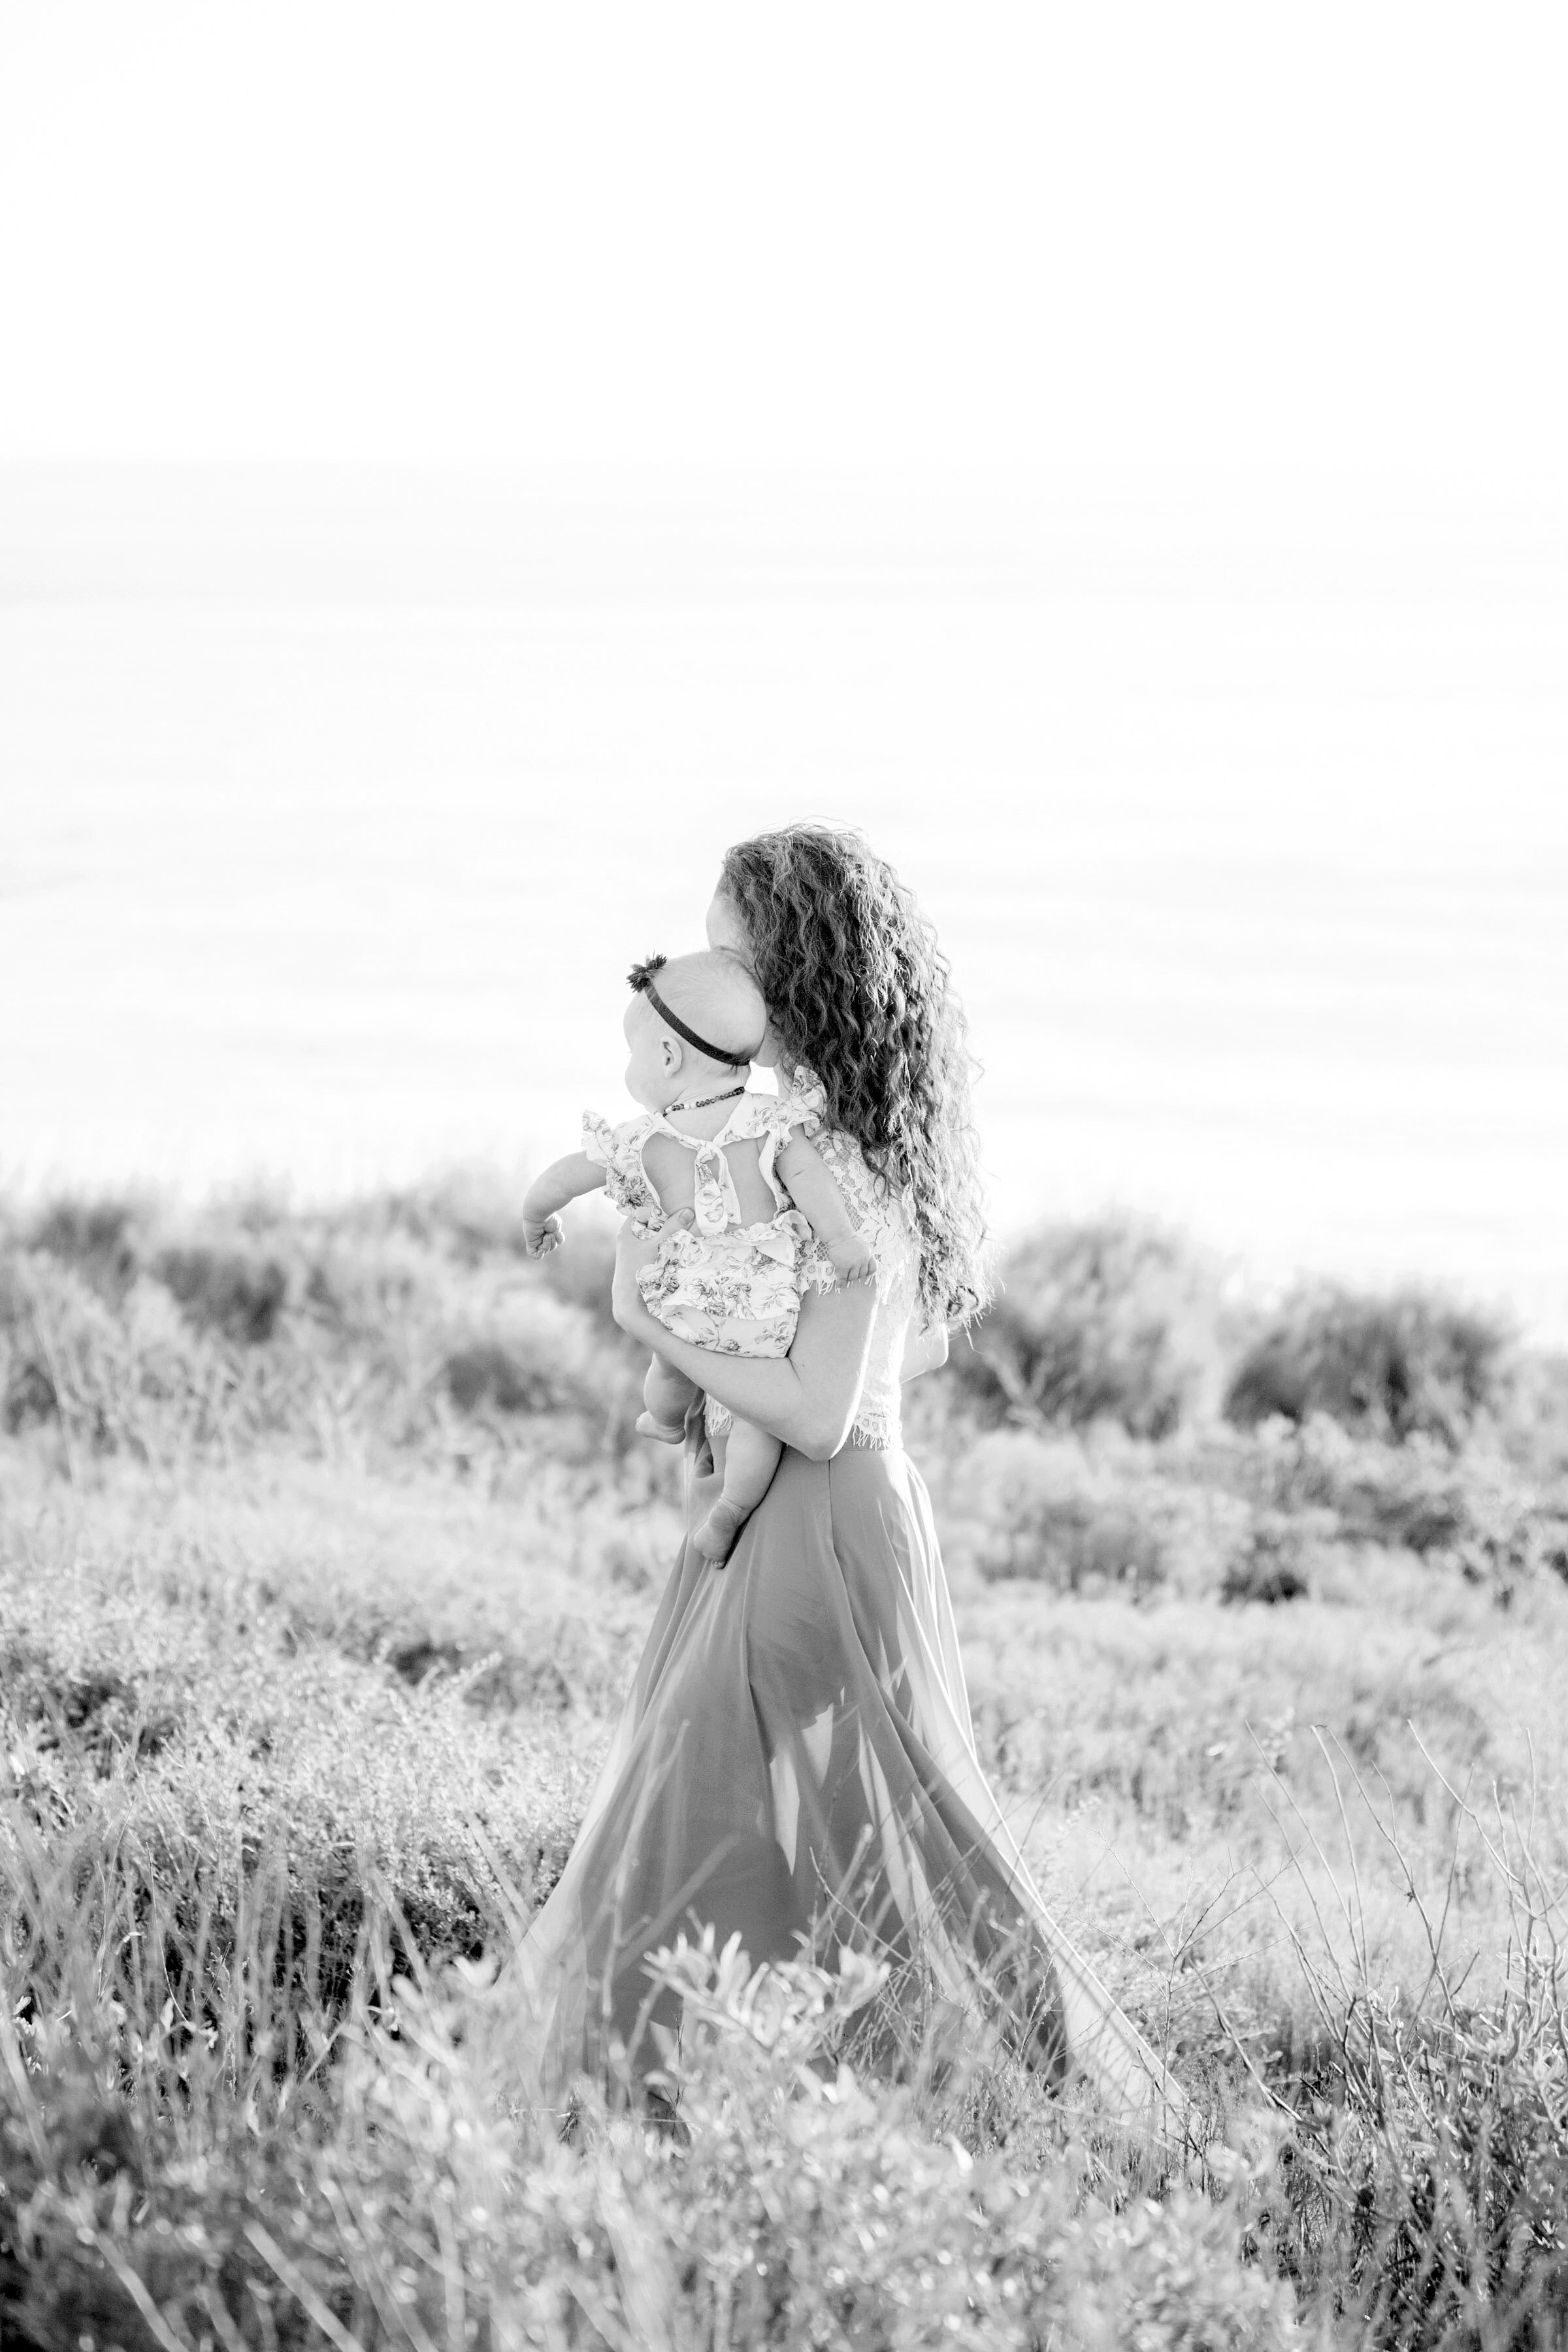 CRYSTAL-COVE-STATE-PARK-FAMILY-PHOTOS-BROOKE-TOBIN-PHOTOGRAPHY_49.jpg